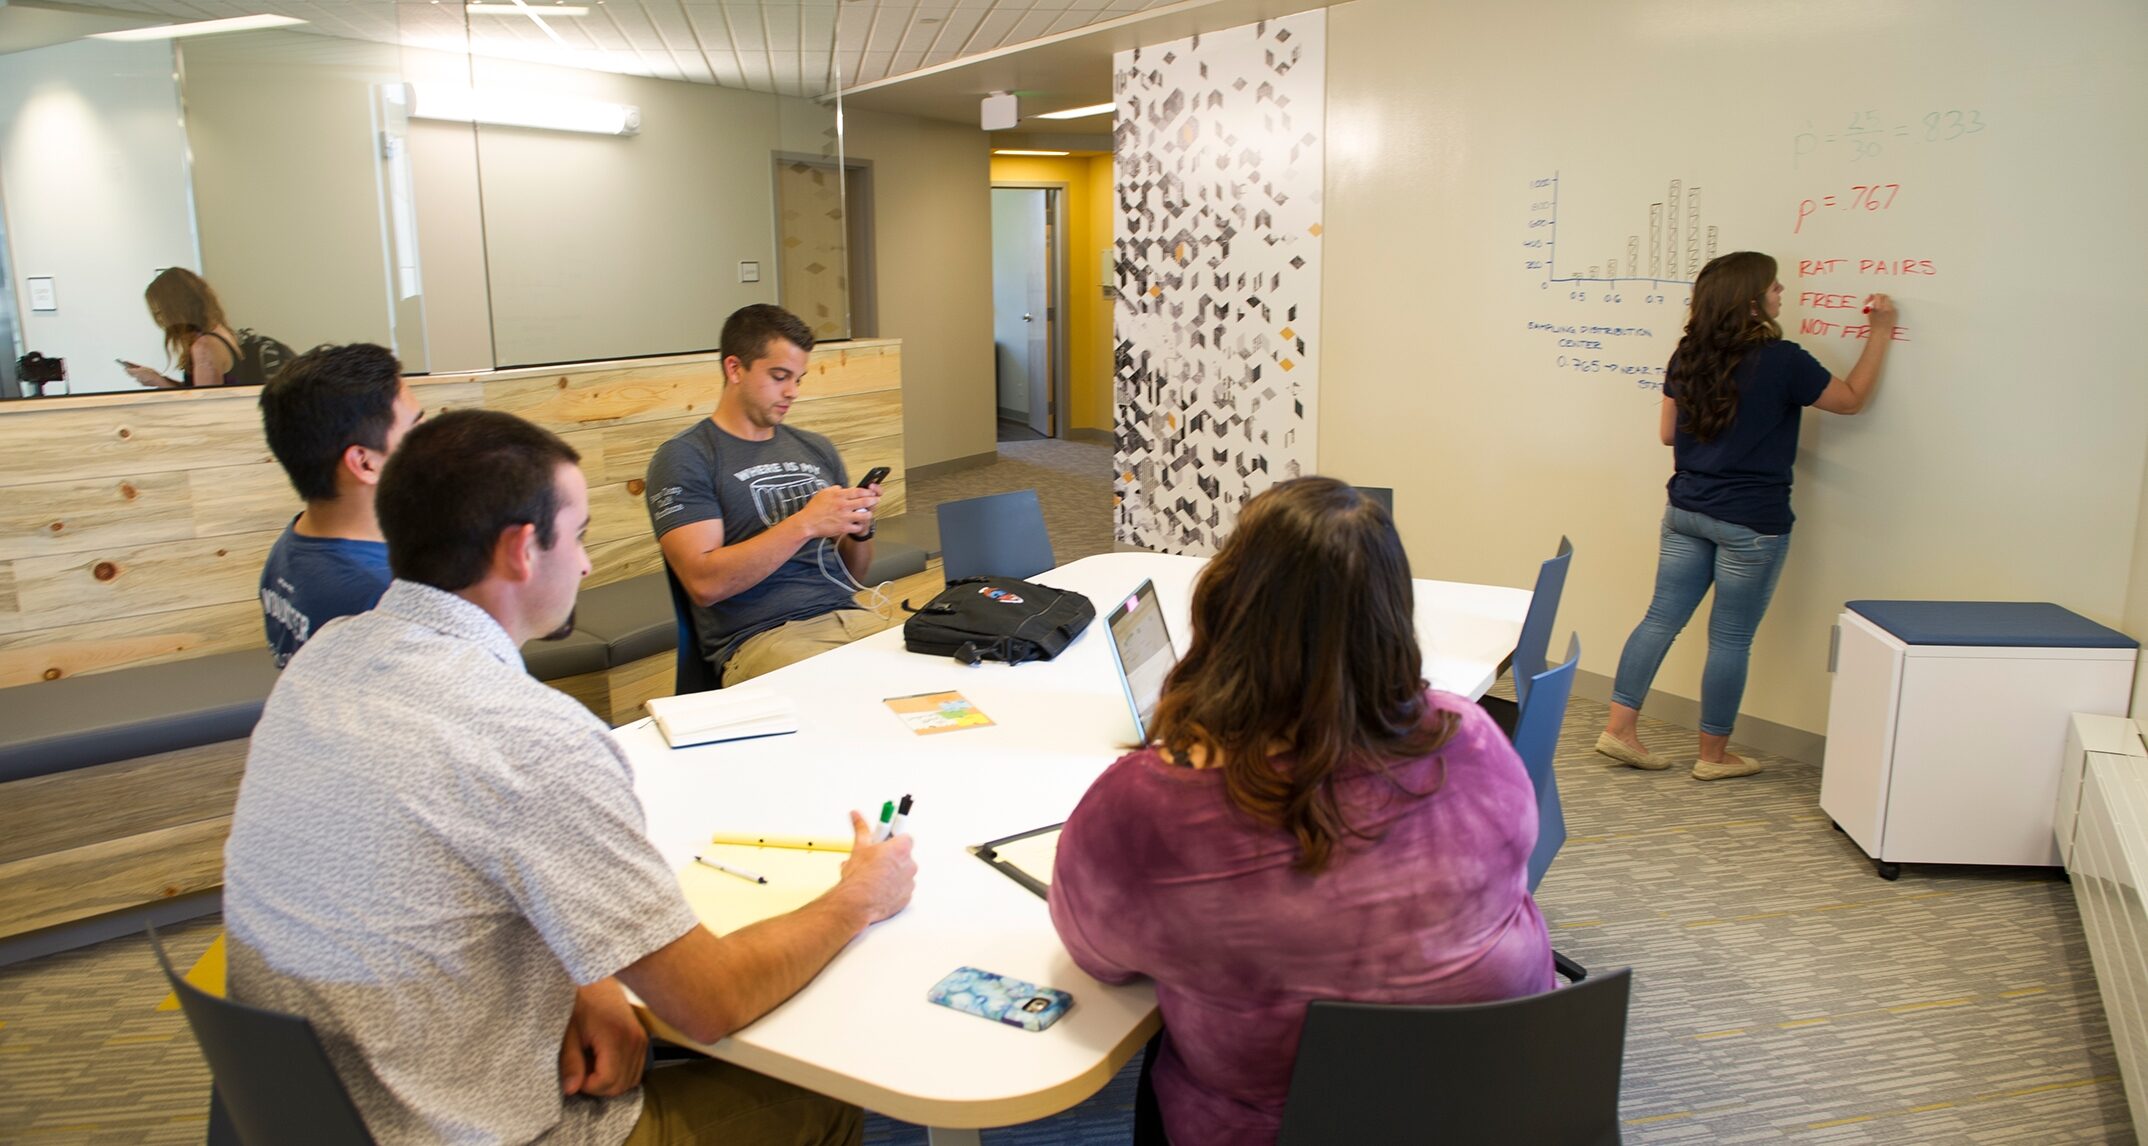 Each floor of Yellowstone Hall features a study space with dry
erase walls and technology hookups that allow students to collaborate on group
projects or study outside of the classroom. Photo by Kelly Gorham. 